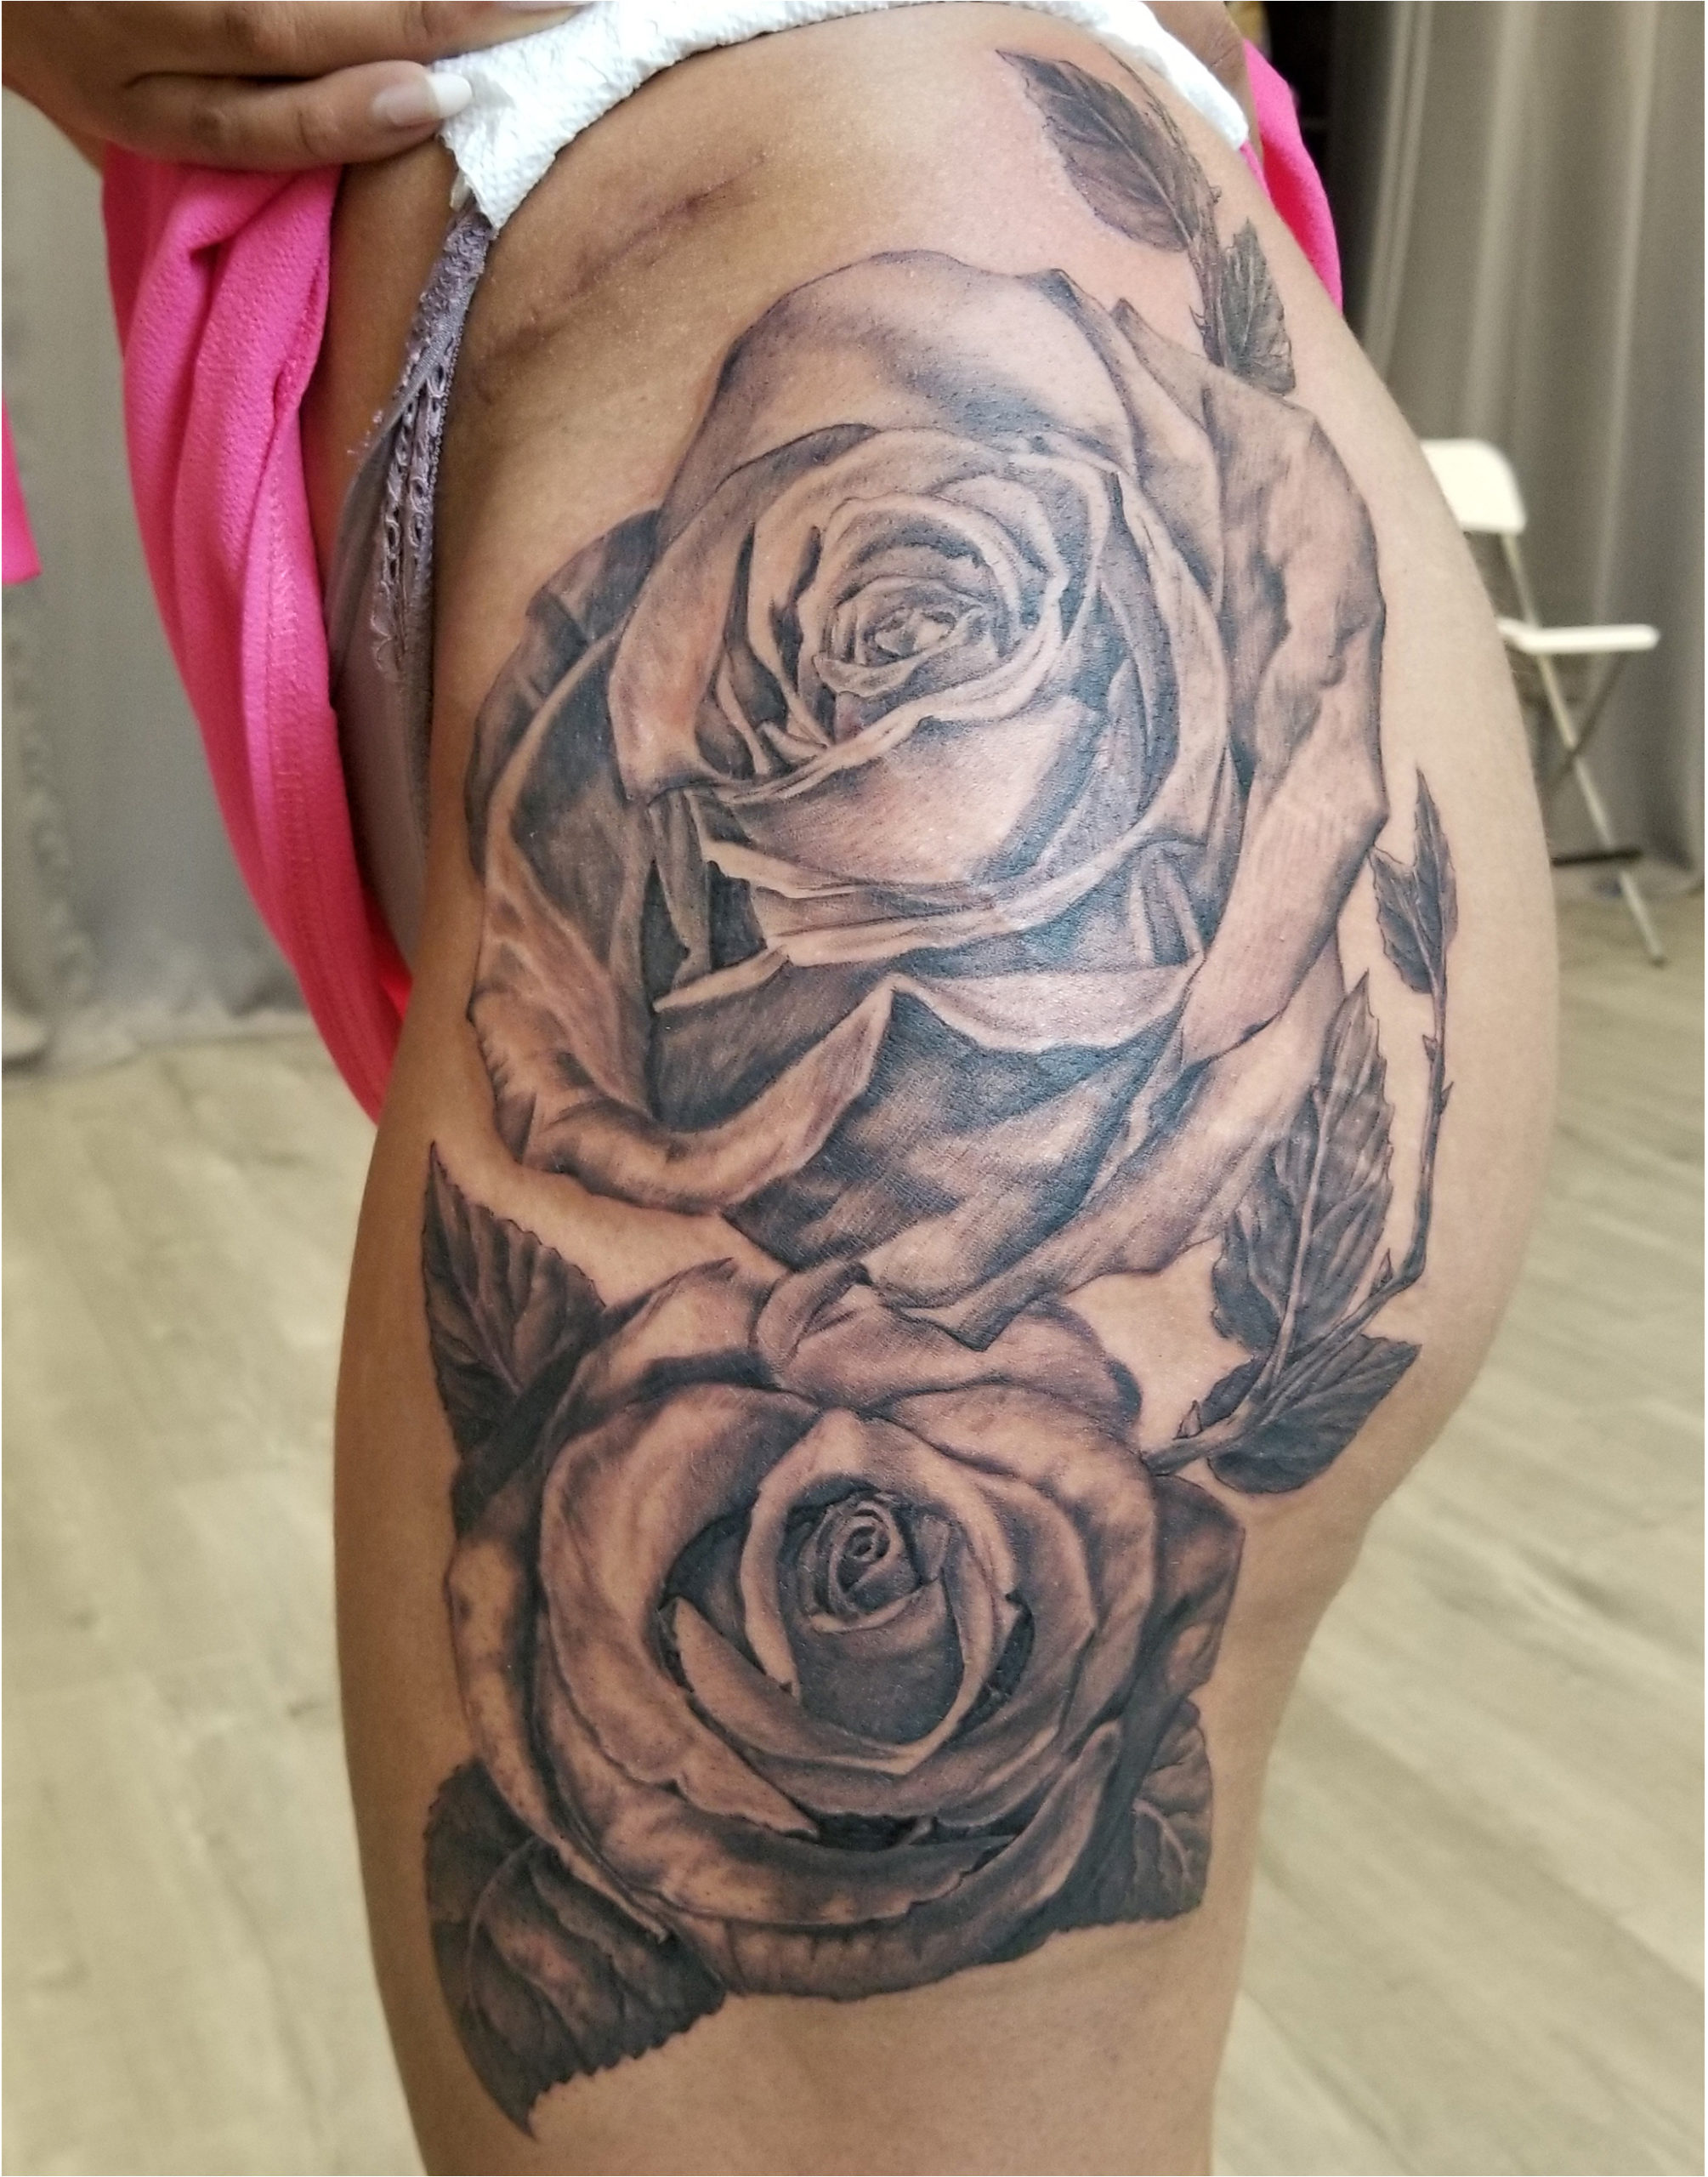 LArge roses tattoo on thigh.  Black adn grey for a vintage photo realistic look.